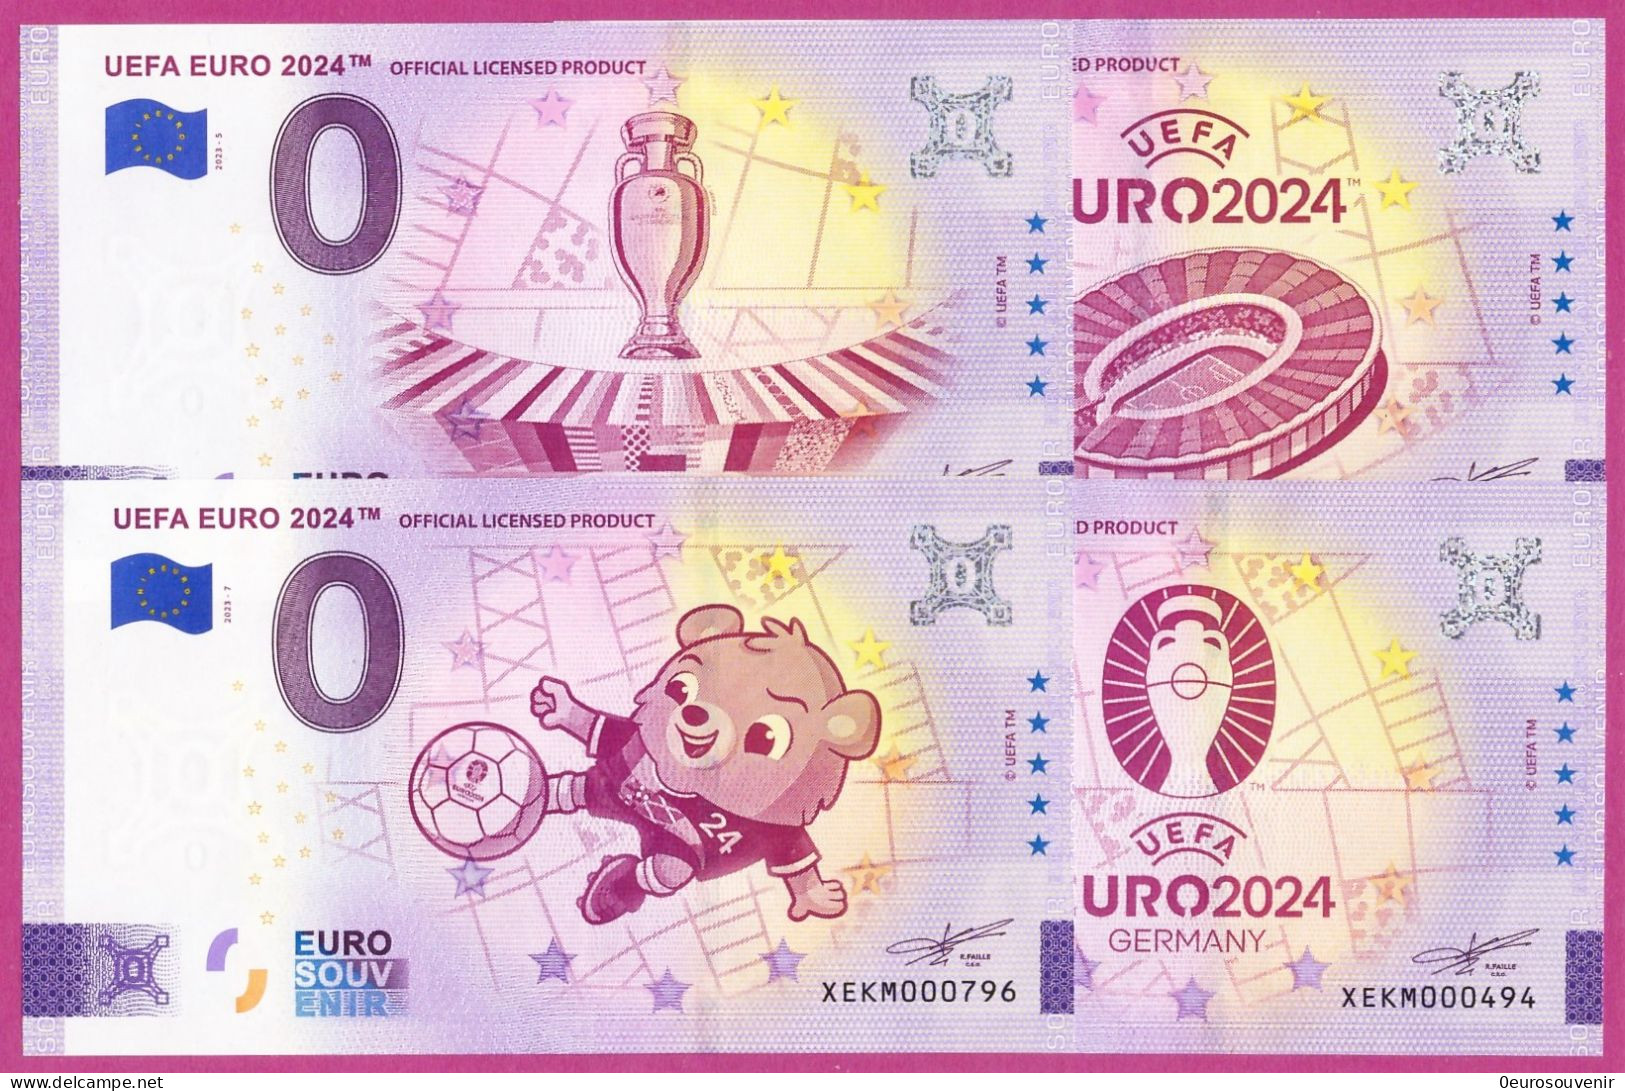 0-Euro XEKM 2023-5 - 8 UEFA EURO 2024 - OFFICIAL LICENSED PRODUCT - Privatentwürfe